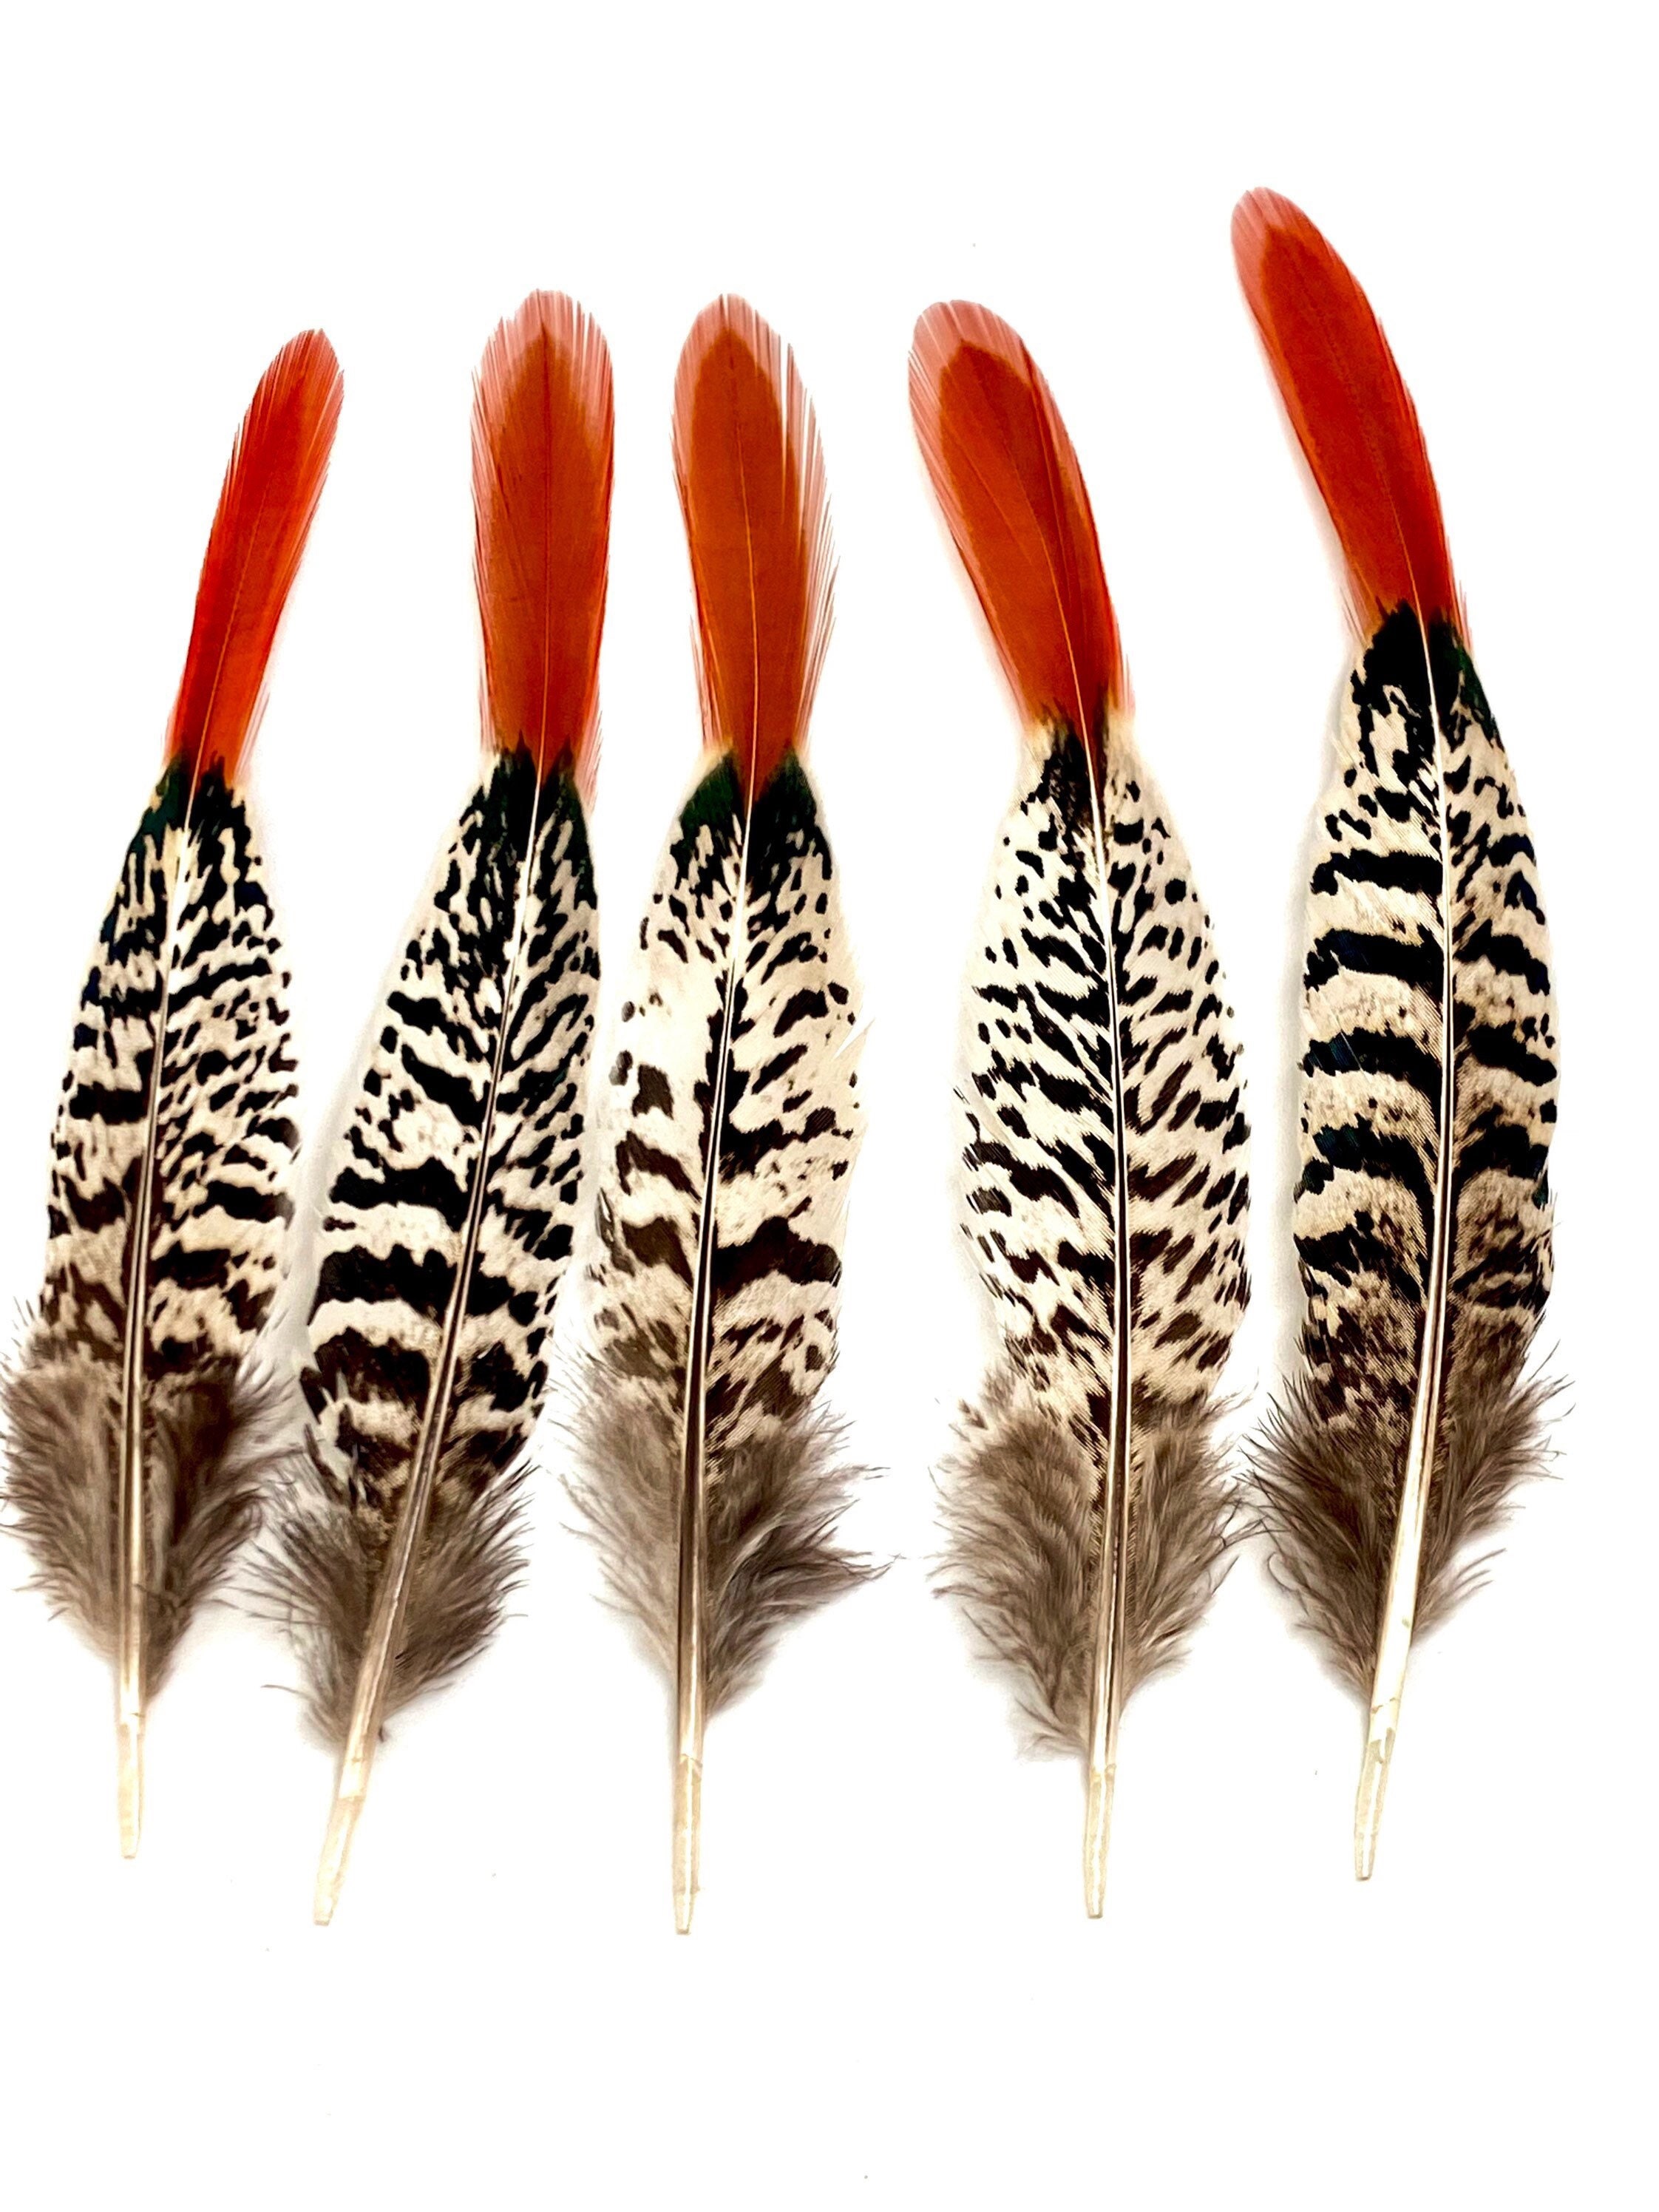 Tissue Paper Feathers, Vegan Feathers, Fake Feather -  Israel